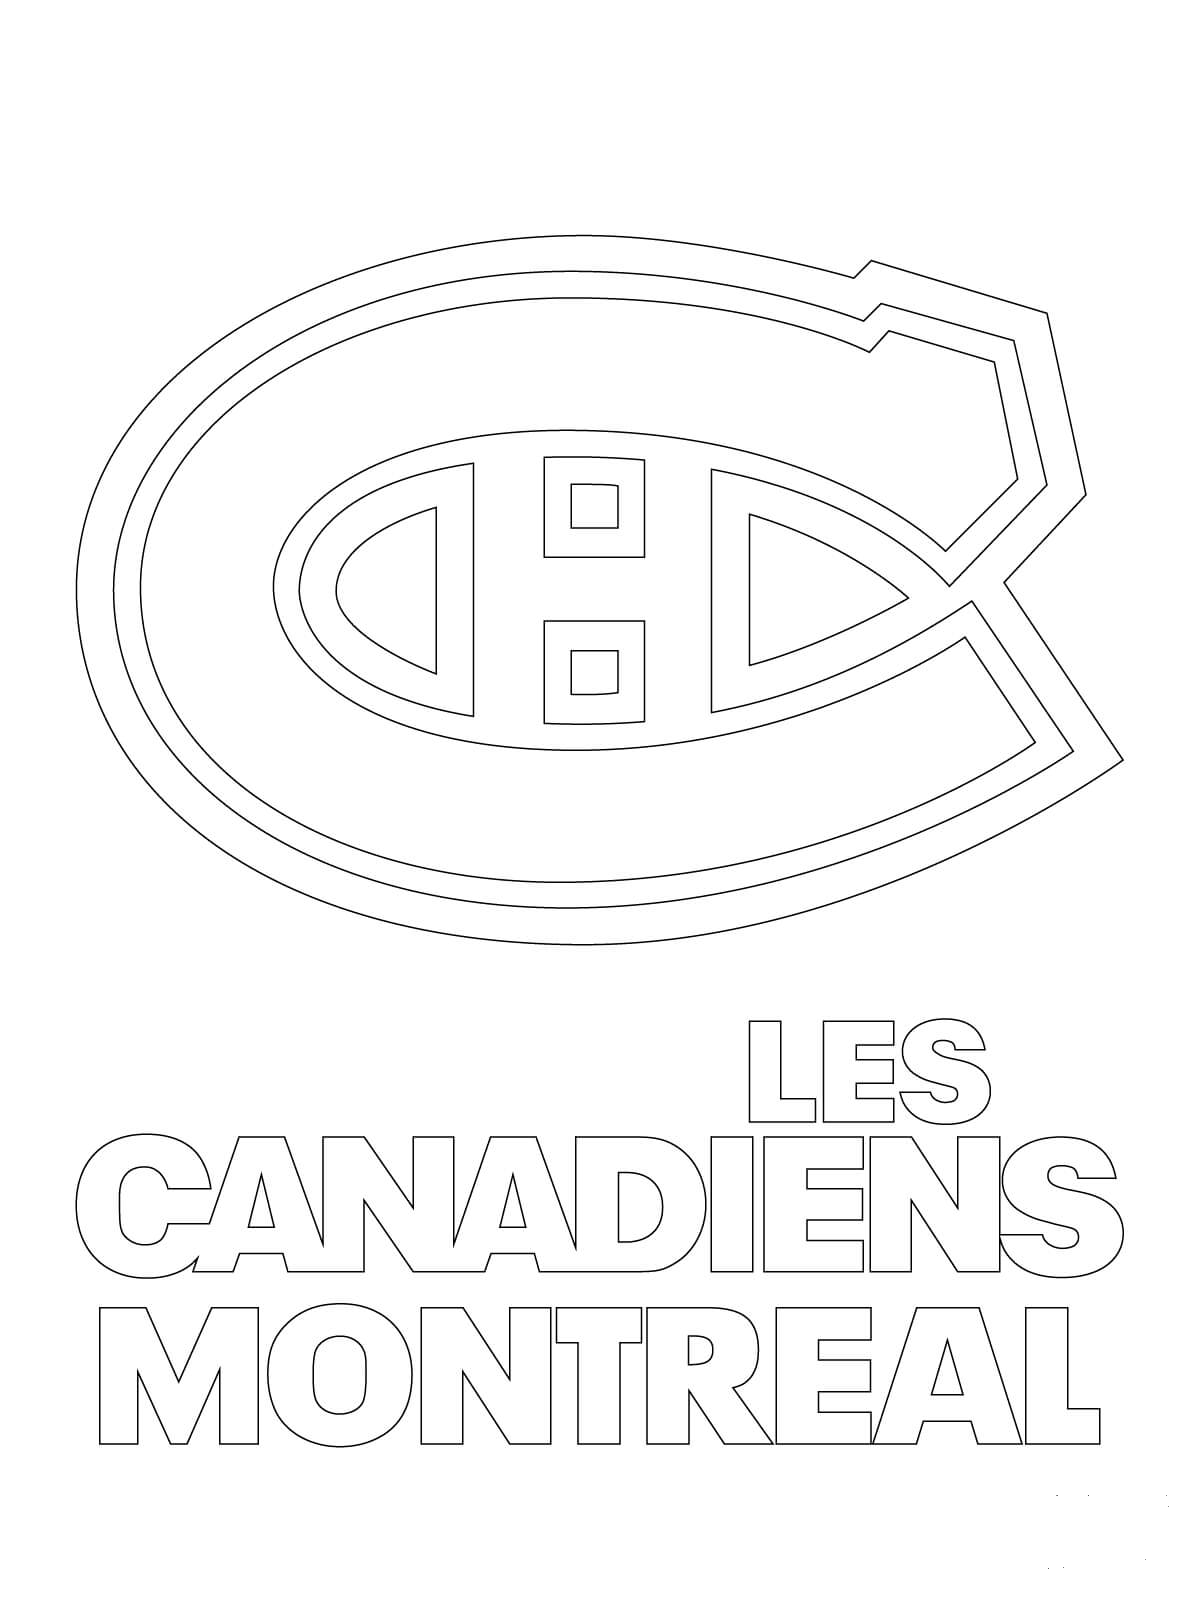 Montreal Canadiens Logo Coloring Page Colouringpages